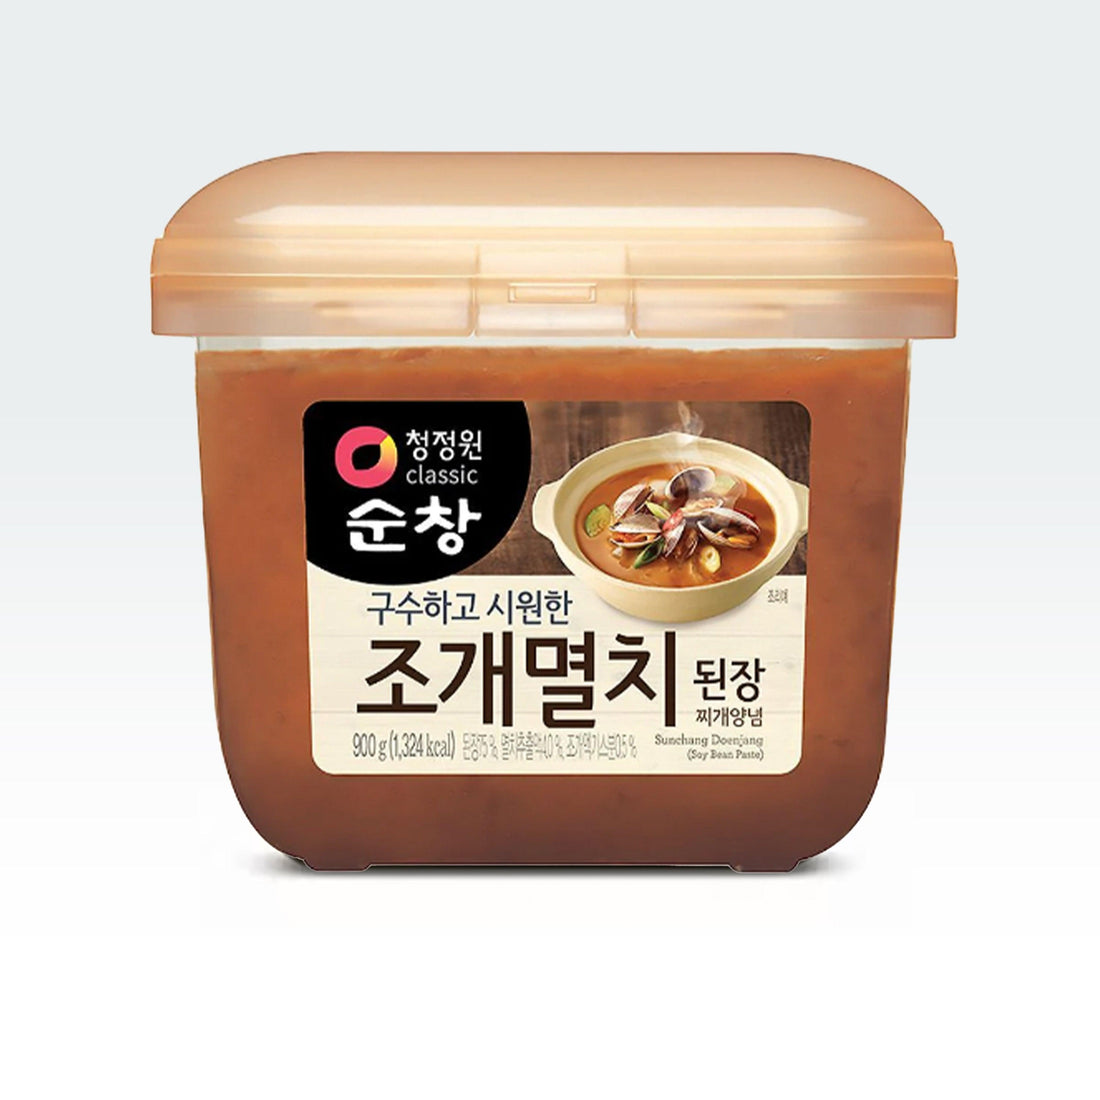 Soybean Paste Shellfish Anchovy Flavor 1.98lb(900g) - Anytime Basket